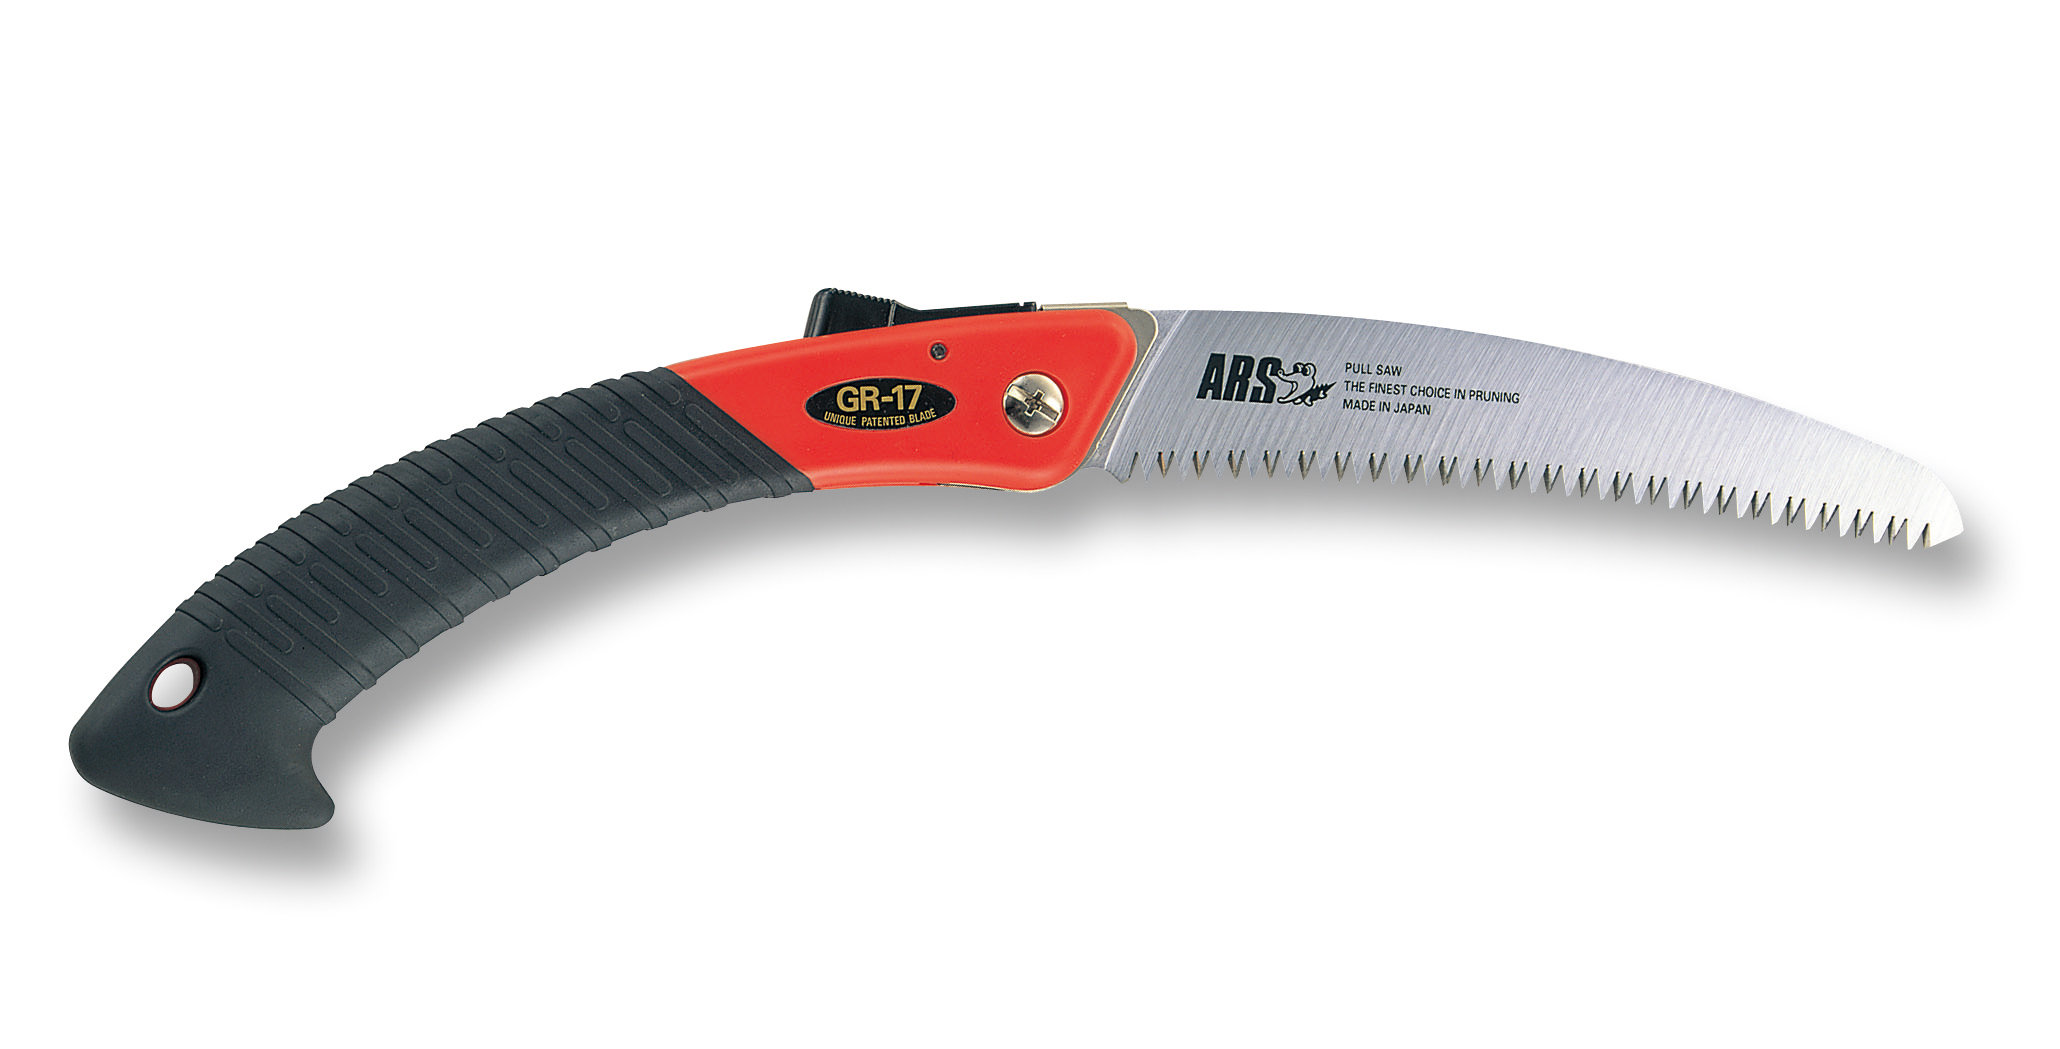 ARS GR17 Deluxe Folding Saw